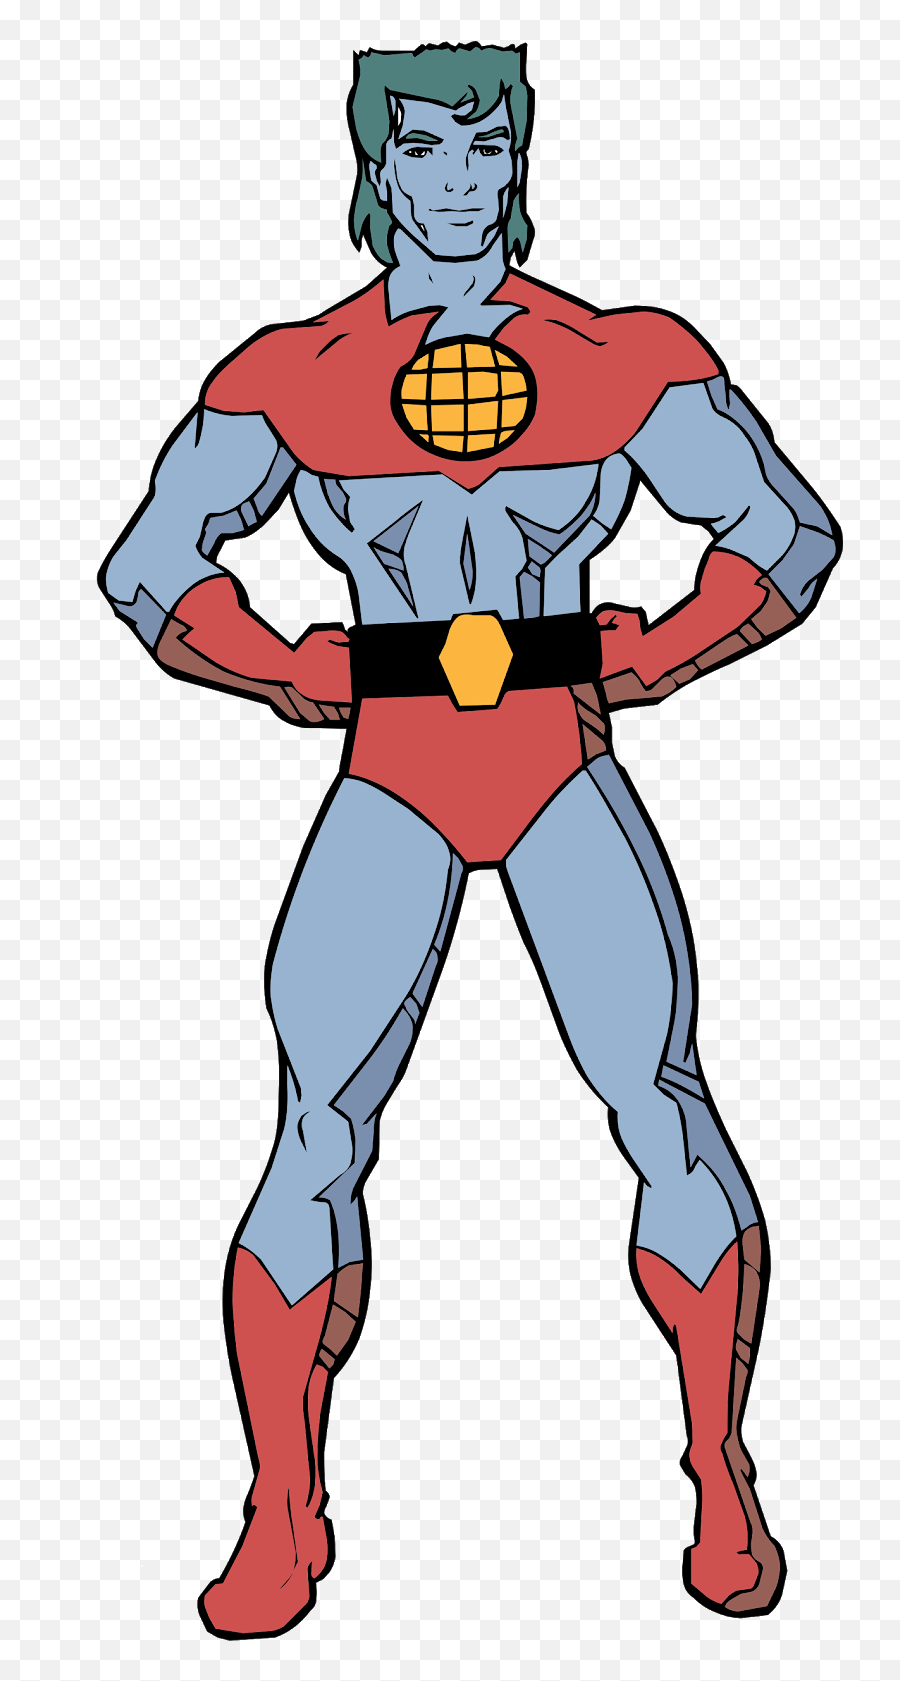 Download Free Png Captain Planet - Cartoon Captain Planet,Captain Planet Png